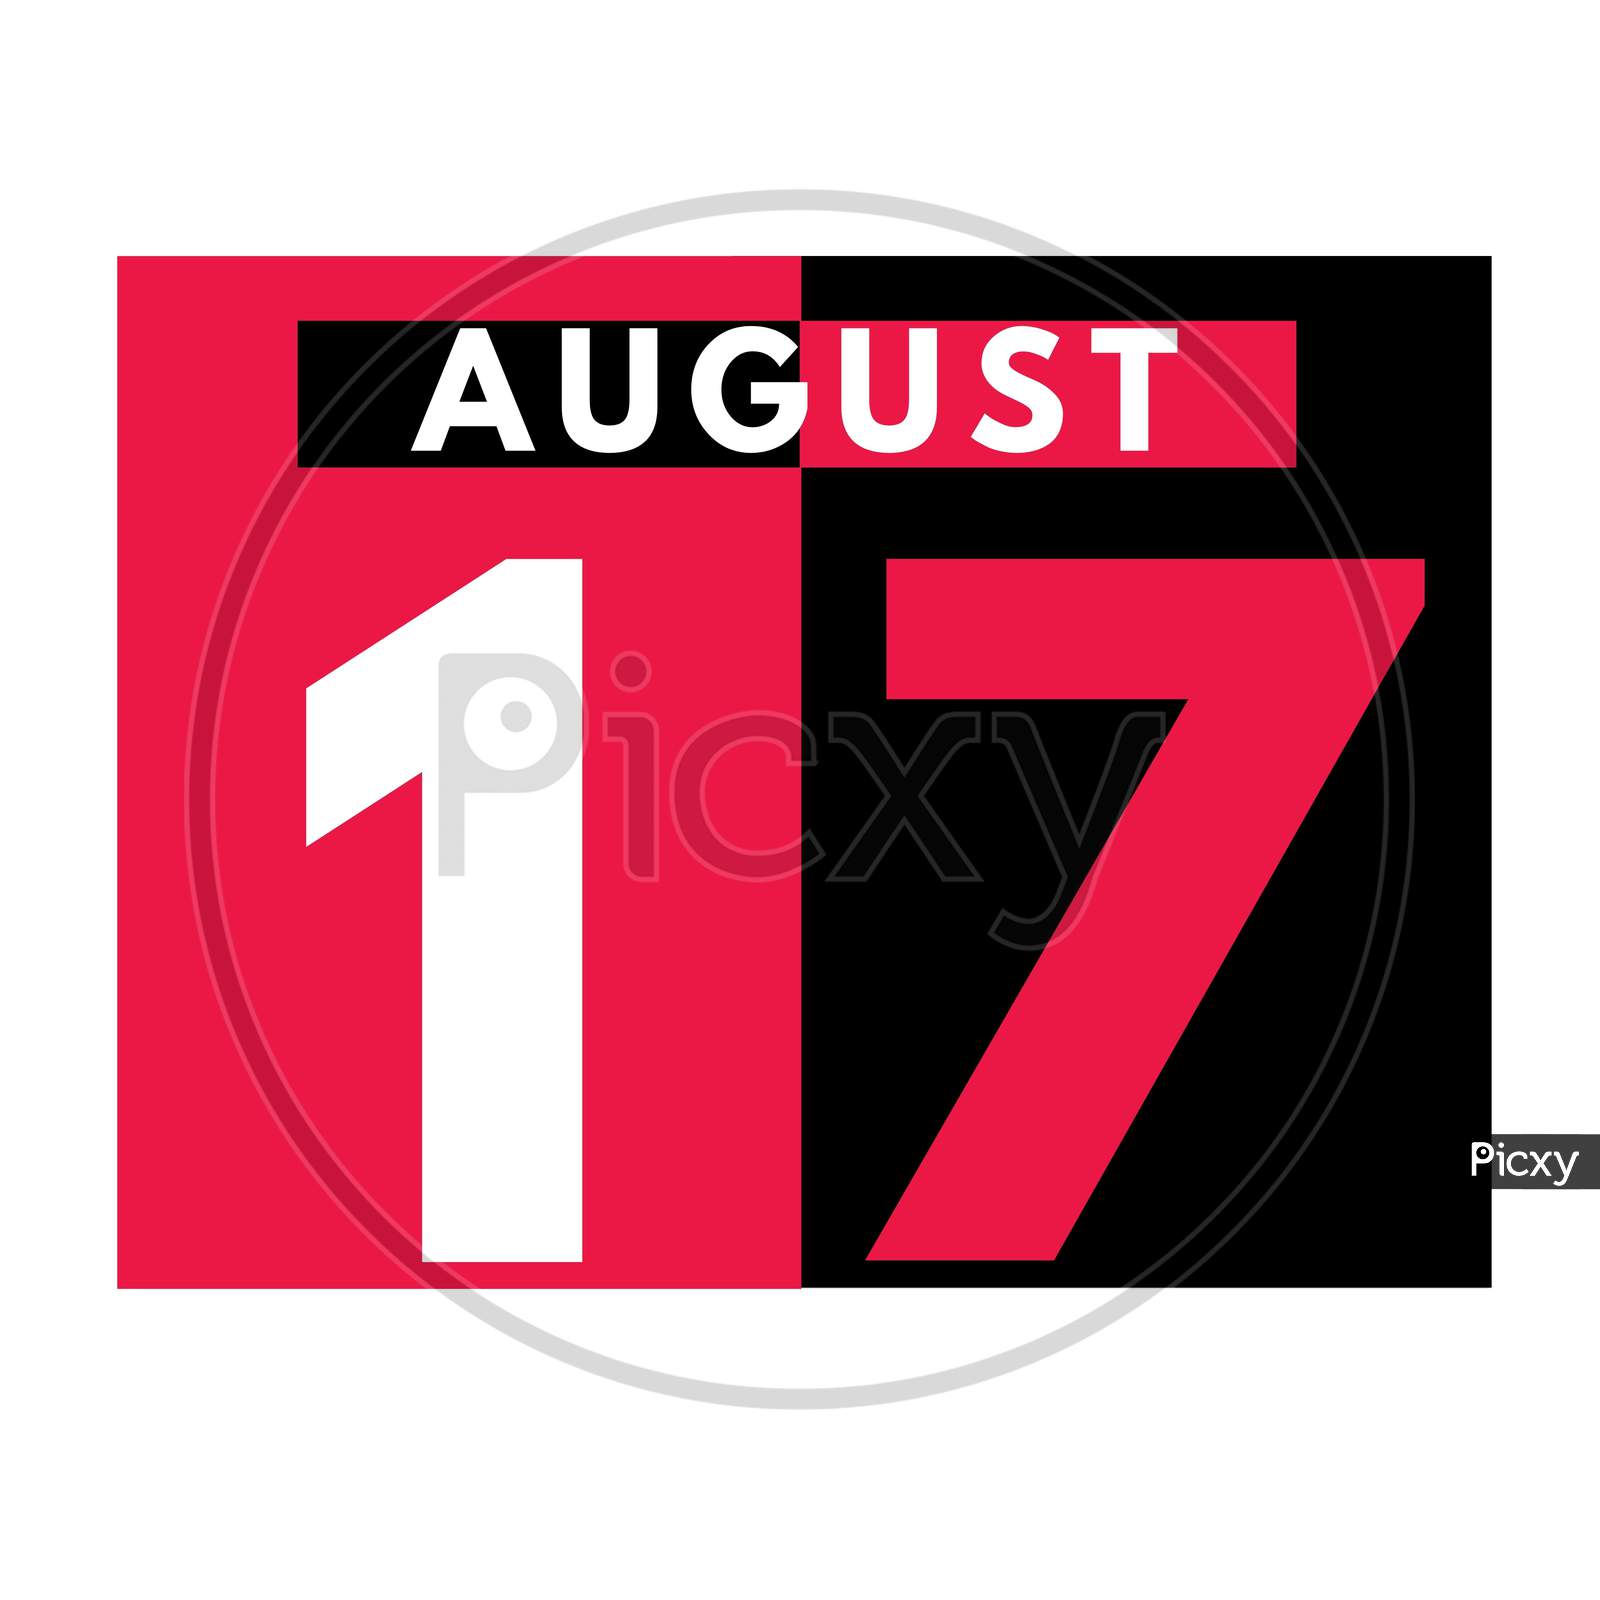 August 17 . Modern Daily Calendar Icon .Date ,Day, Month .Calendar For The Month Of August